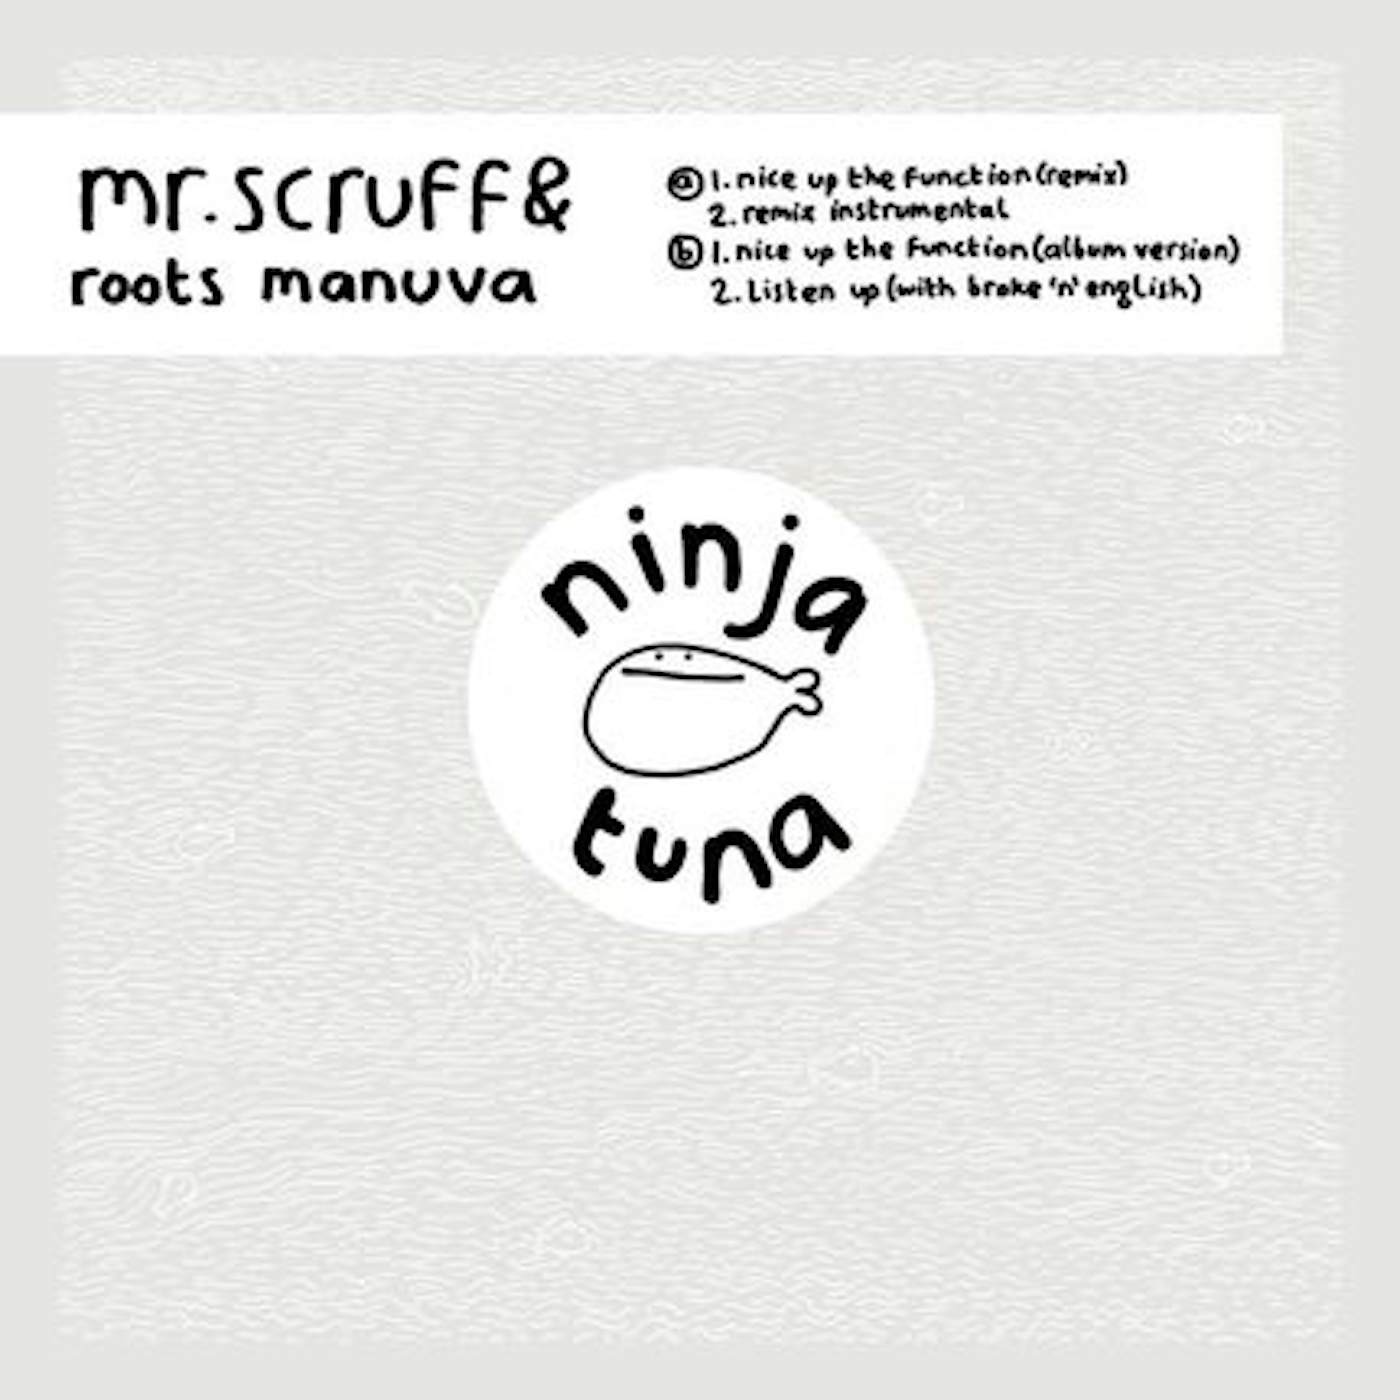 Mr. Scruff Nice Up The Function Vinyl Record